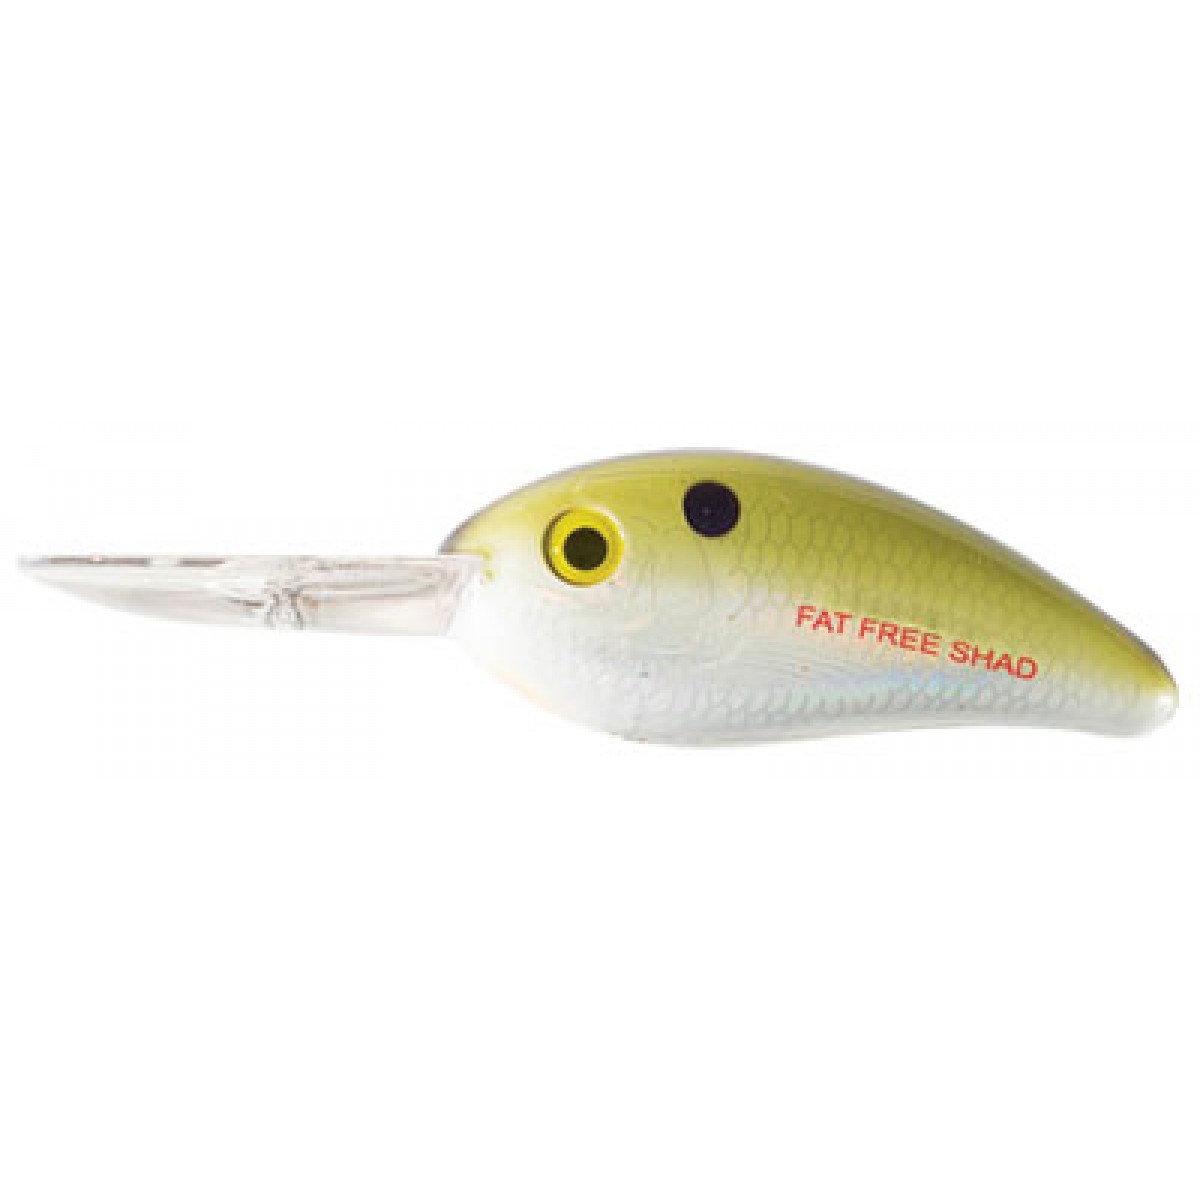 Bomber Lures Fat Free Shad Pearl White BD4FDPW Fishing 4-6 ft 